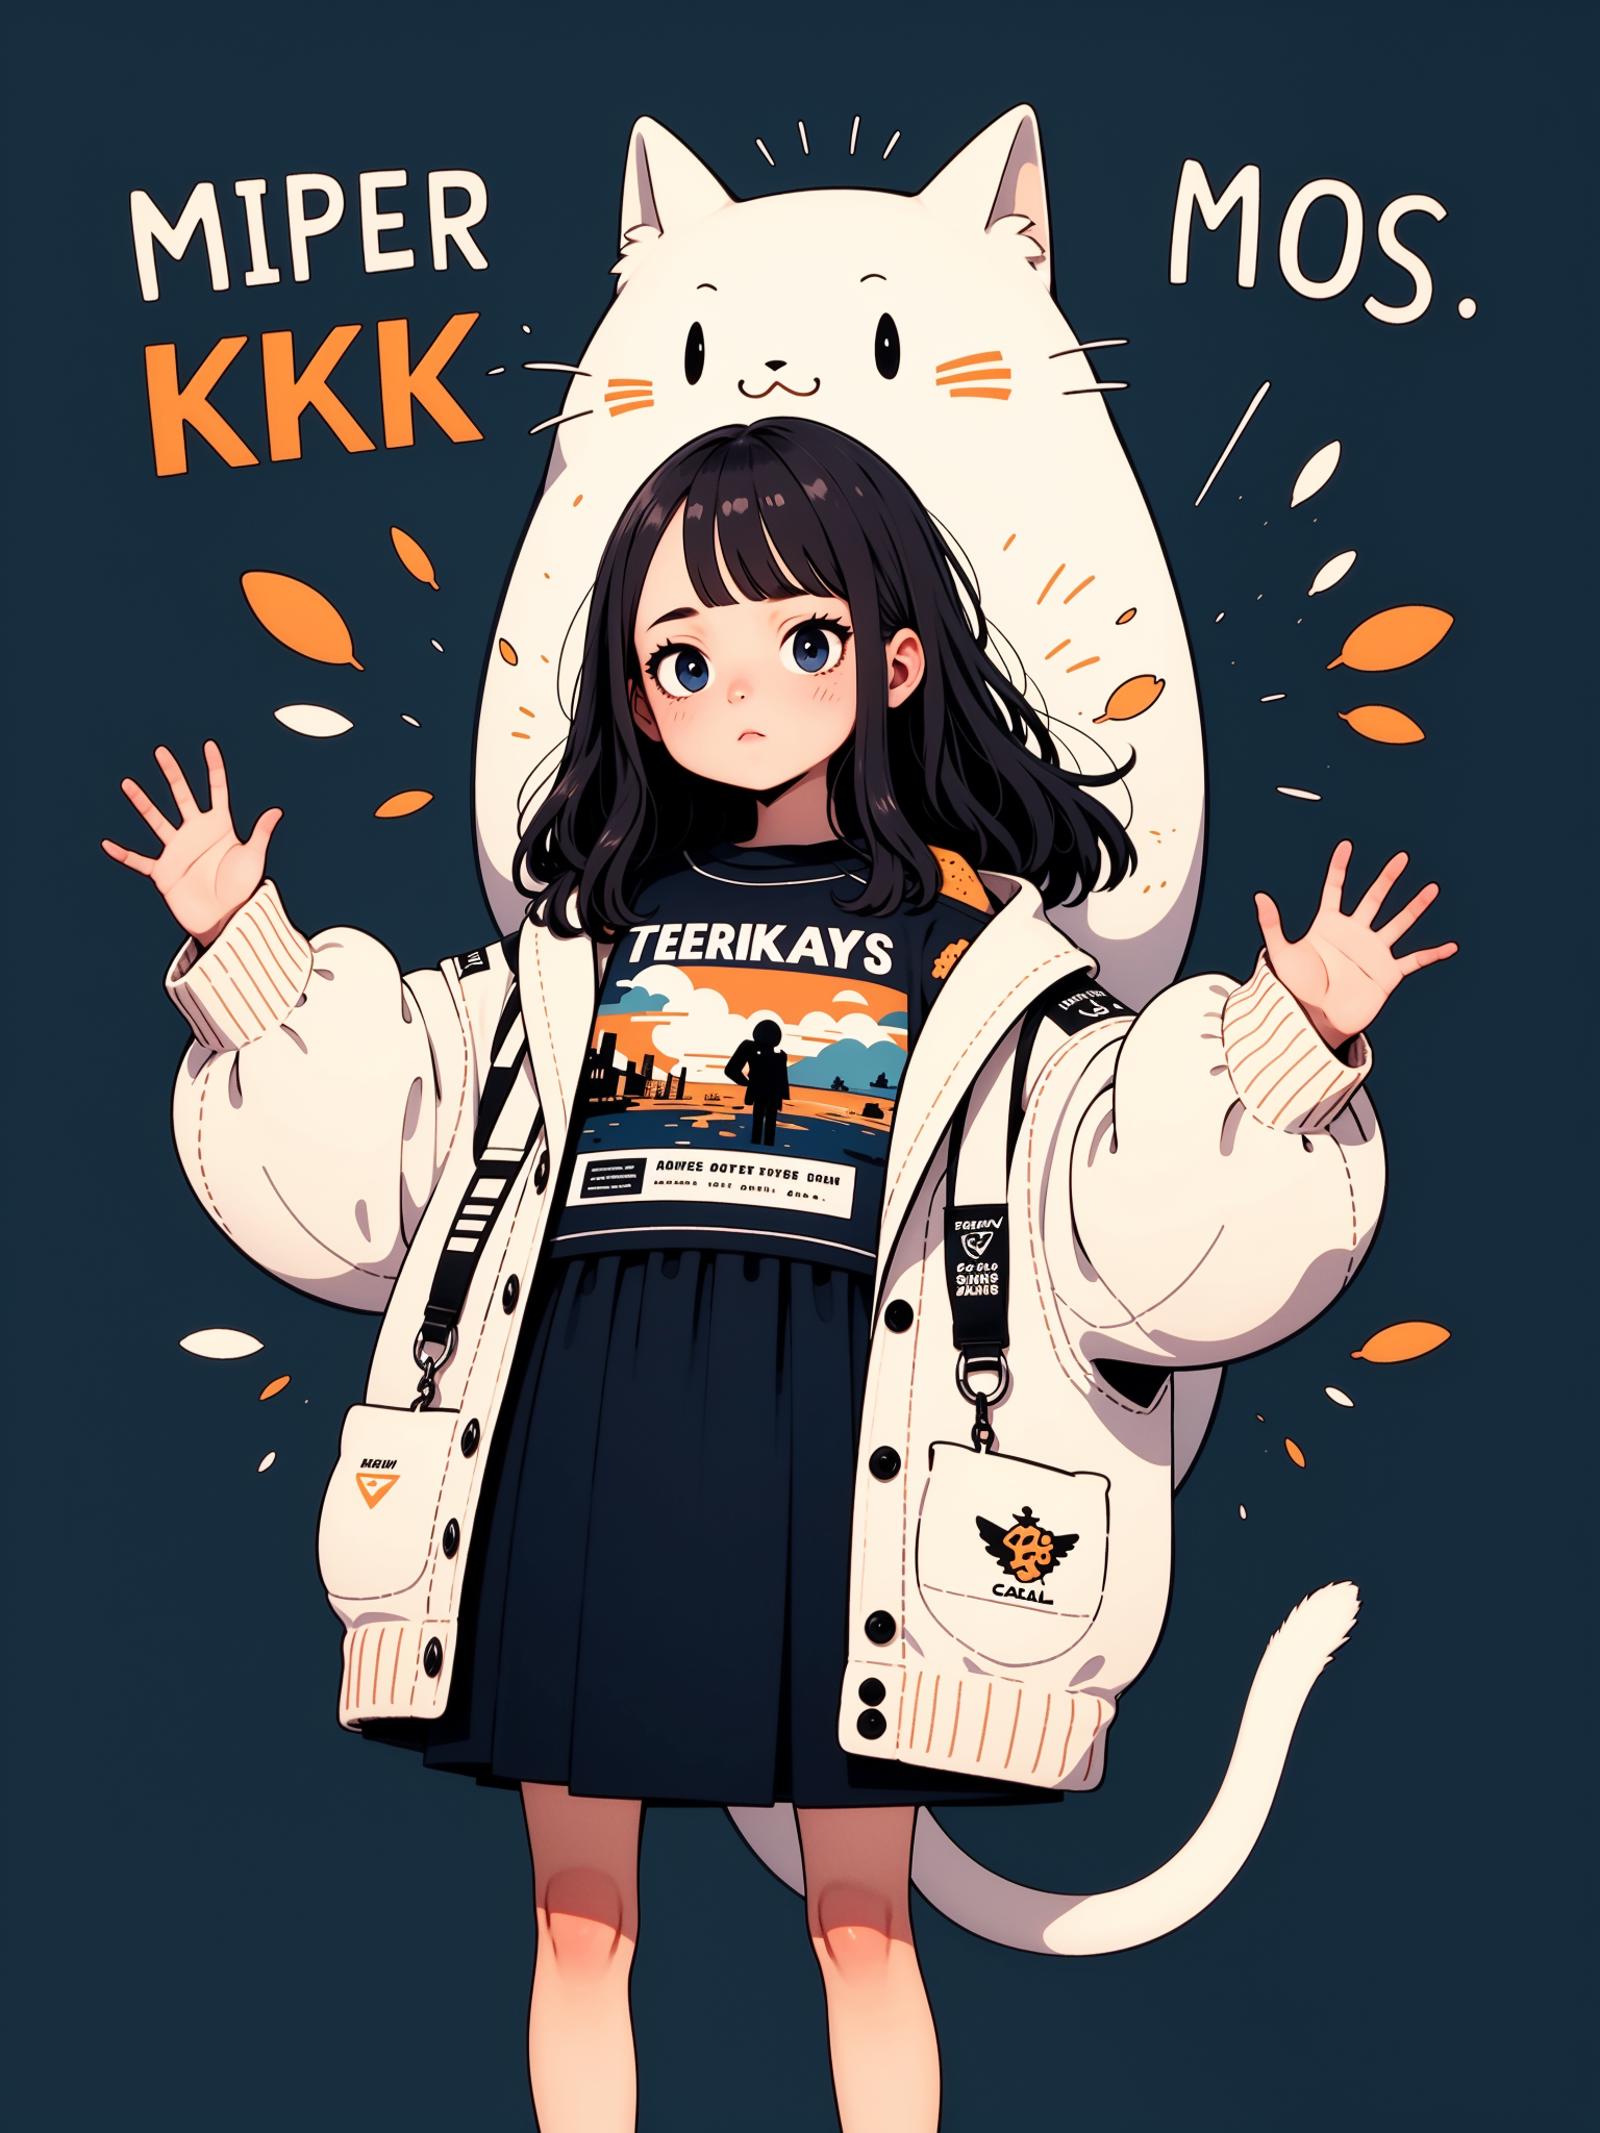 A cartoon drawing of a woman wearing a white jacket and a shirt with the words "Teekiays" on it, with a cat on her shoulder.